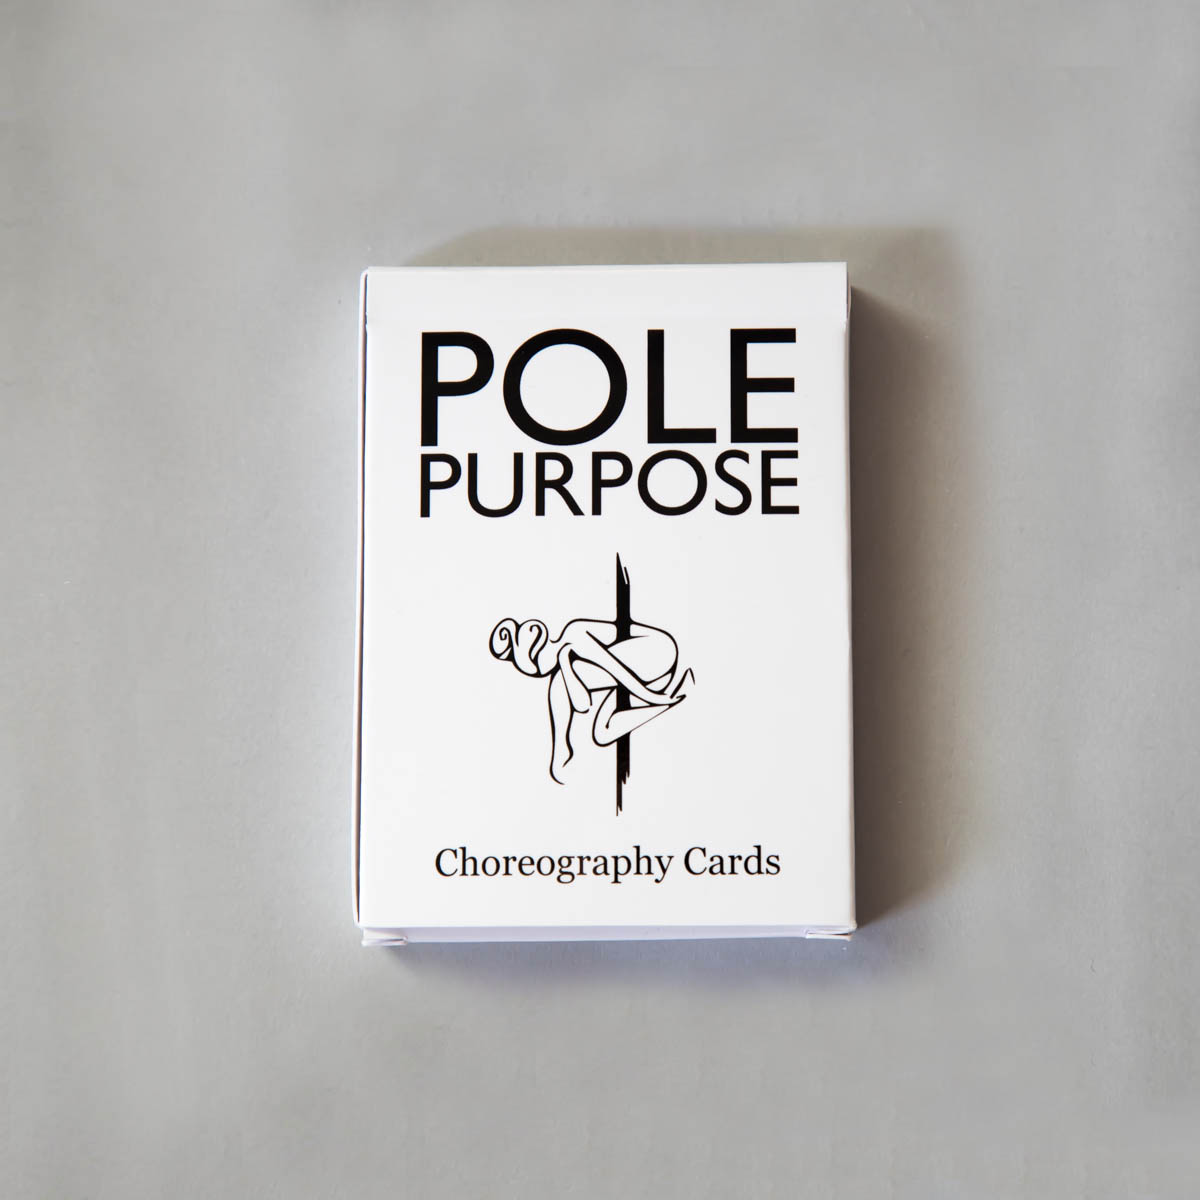 Choreography Cards for Pole Dancers